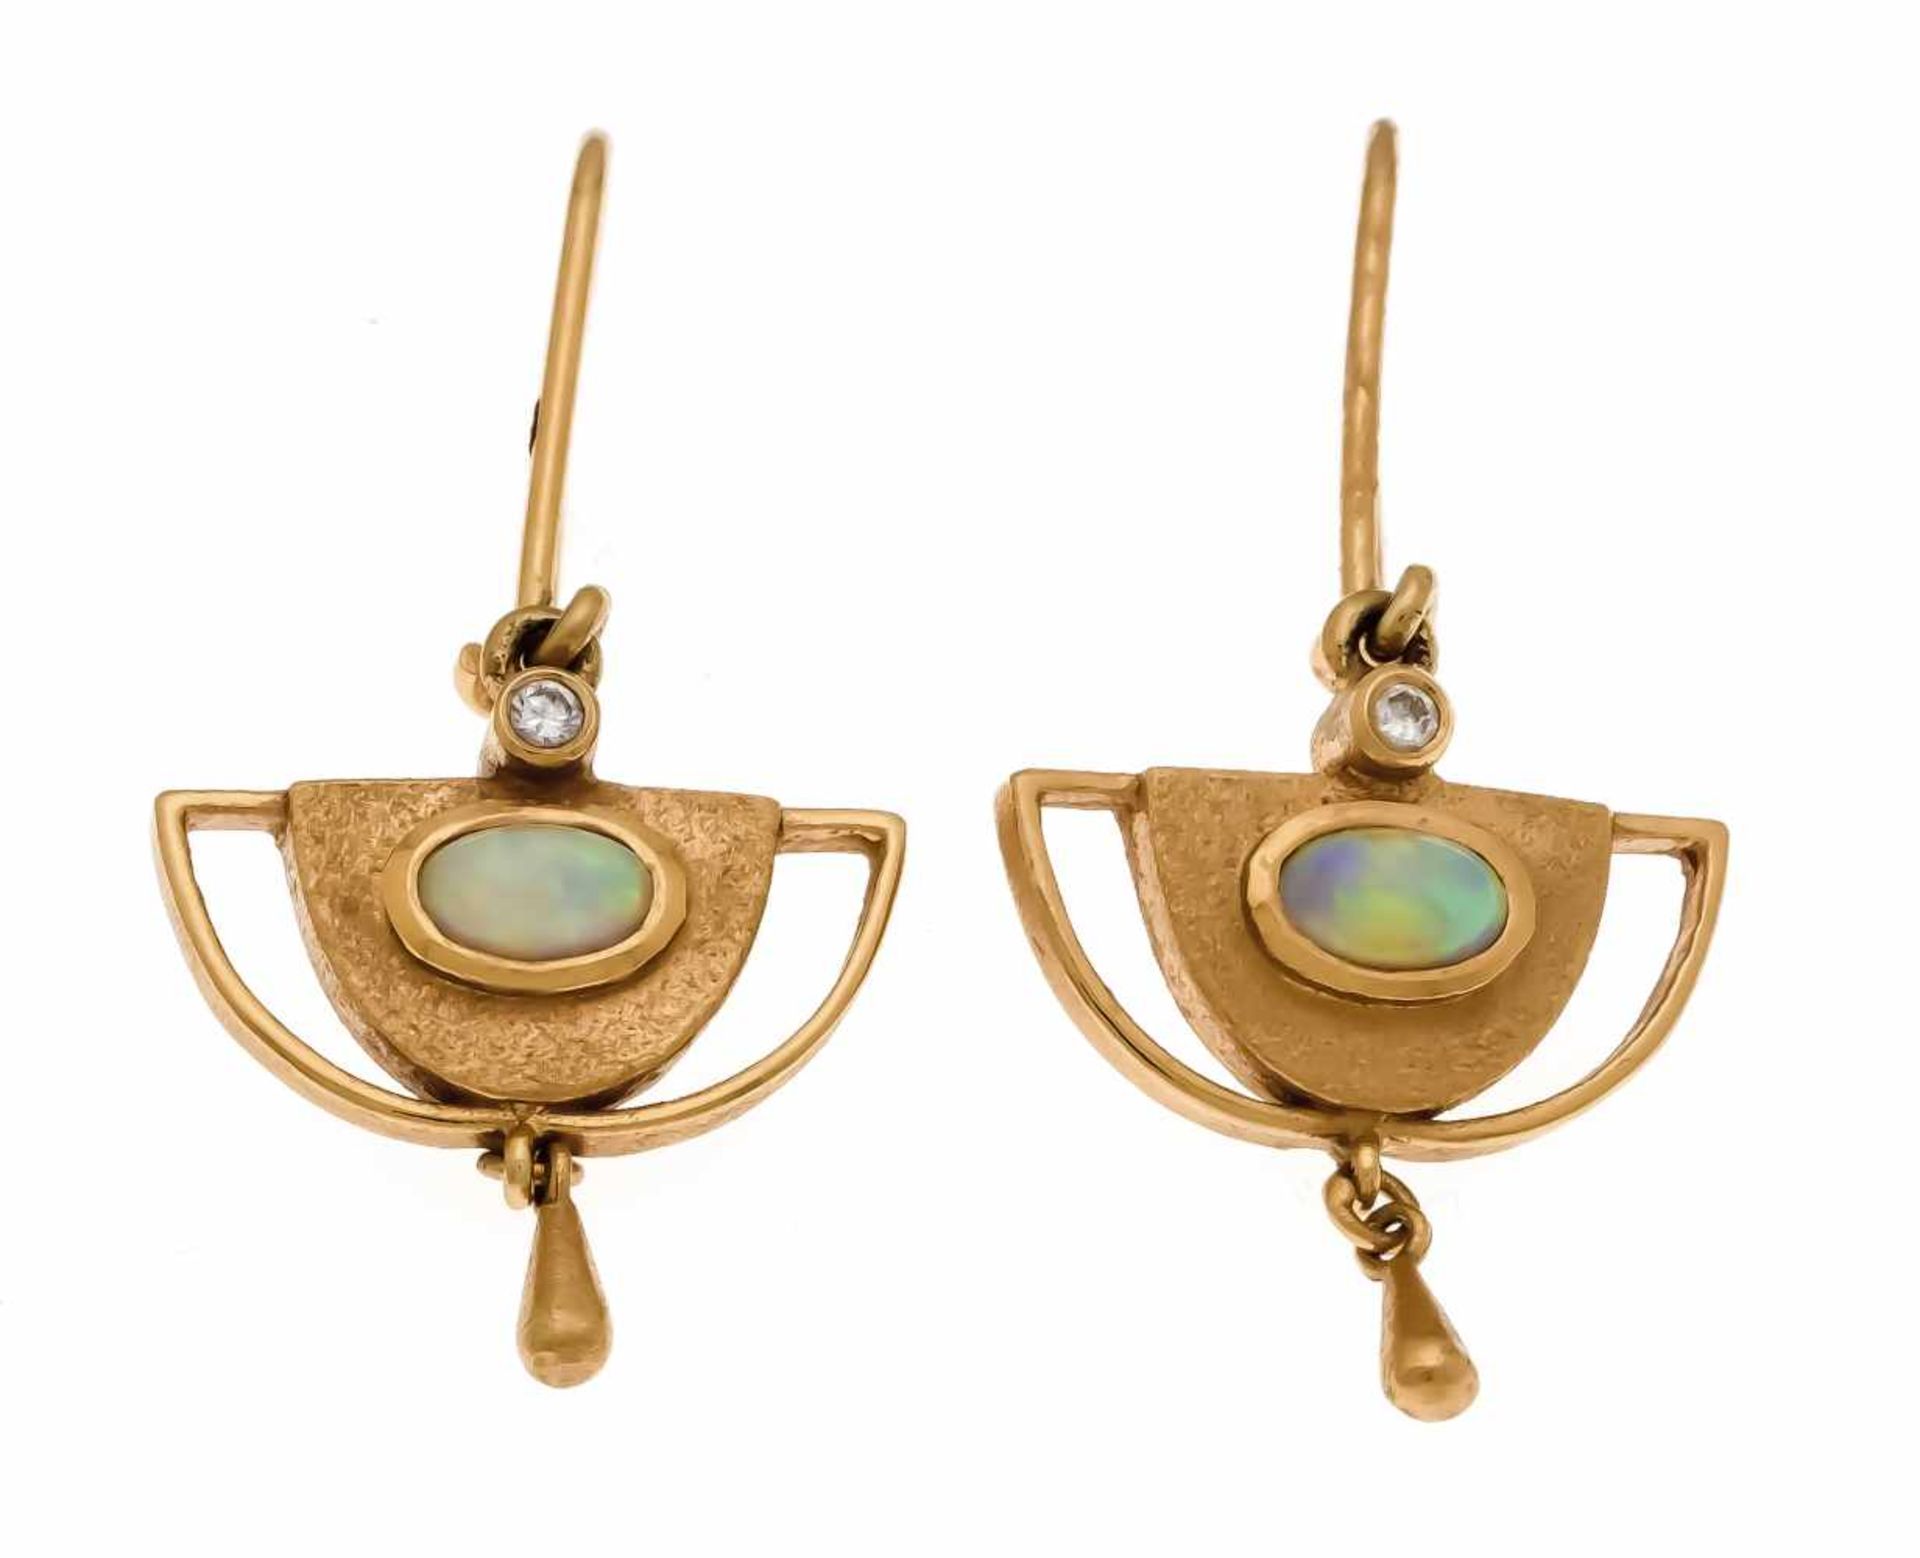 Opal-brilliant earrings GG 585/000 with 2 oval opal cabochons 5 x 3 mm and 2 diamonds, inaddition